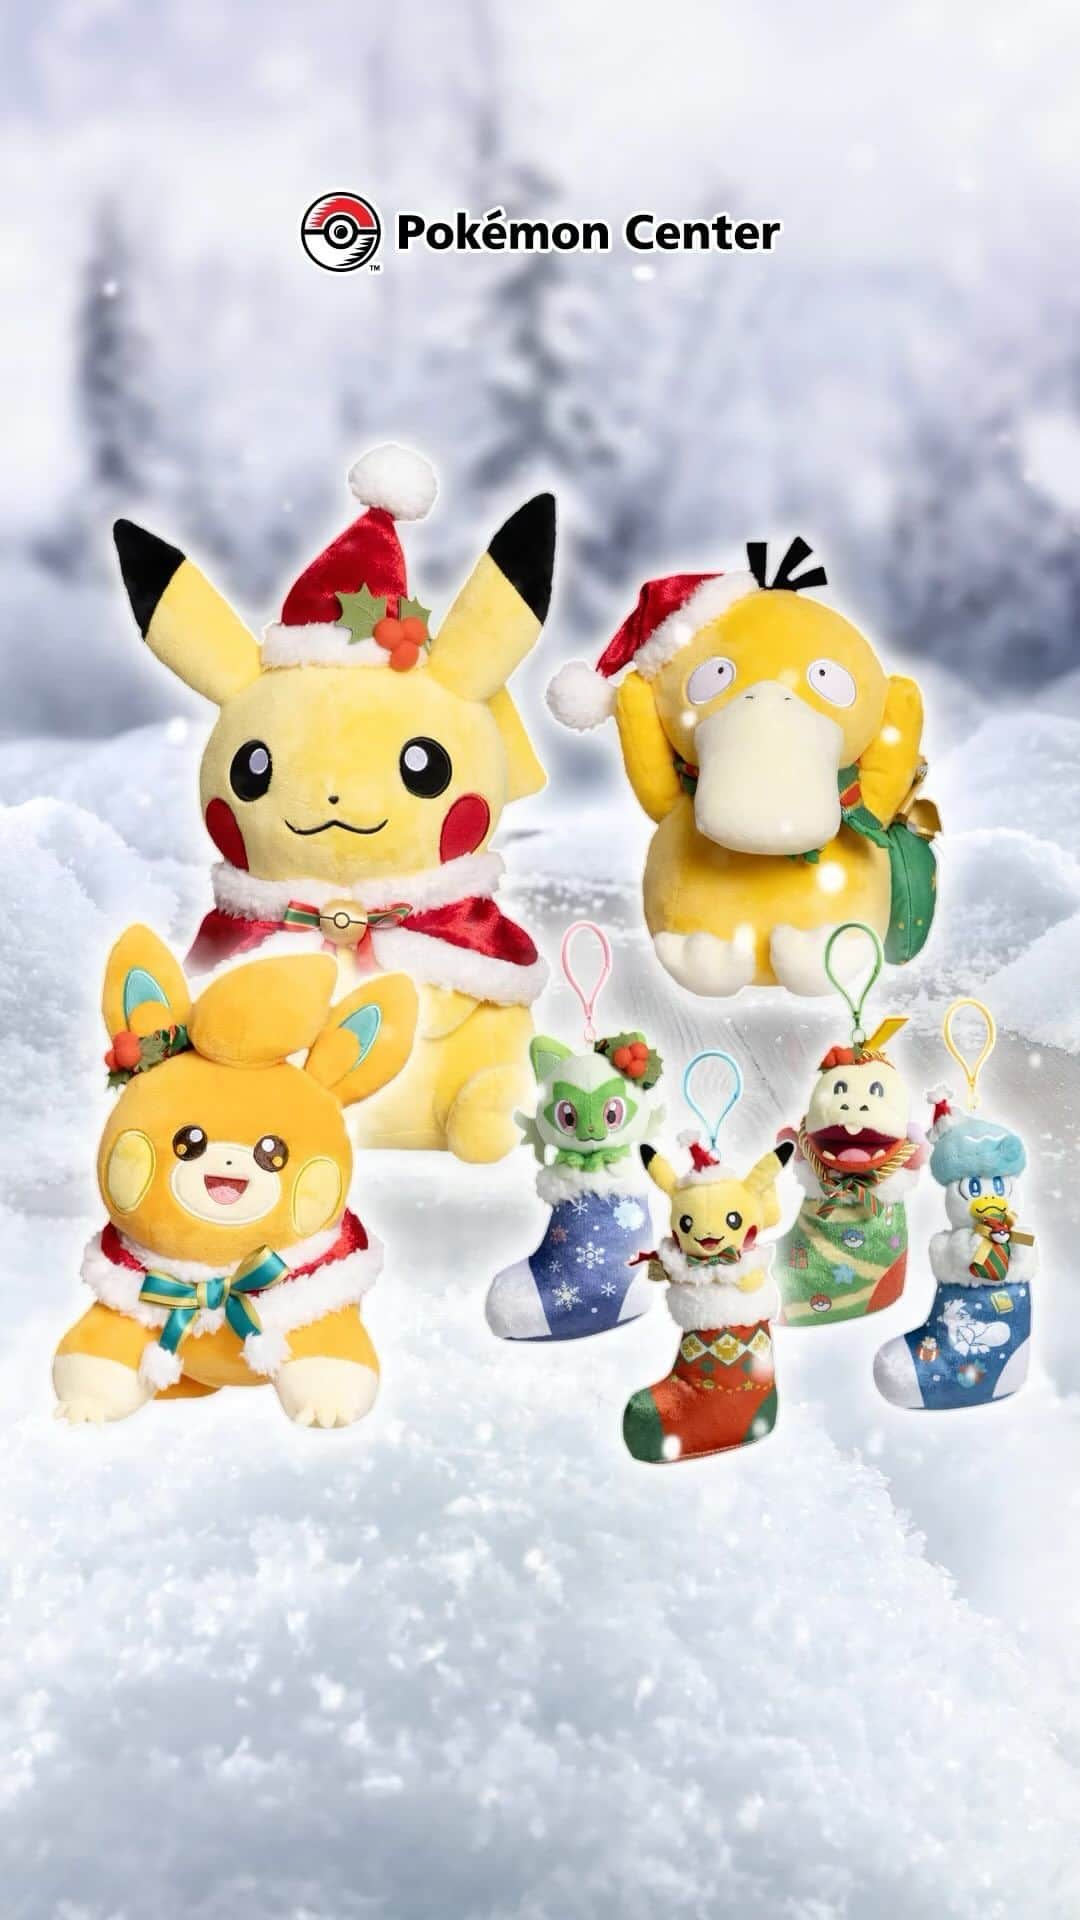 Pokémonのインスタグラム：「New festive friends have arrived at Pokémon Center! Find Pikachu, Psyduck, Pawmi, and more as adorable Pokémon Holiday Plush ❄️☃️  Which plush are you cuddling up to this holiday season?  Shop holiday plush at link in bio.」